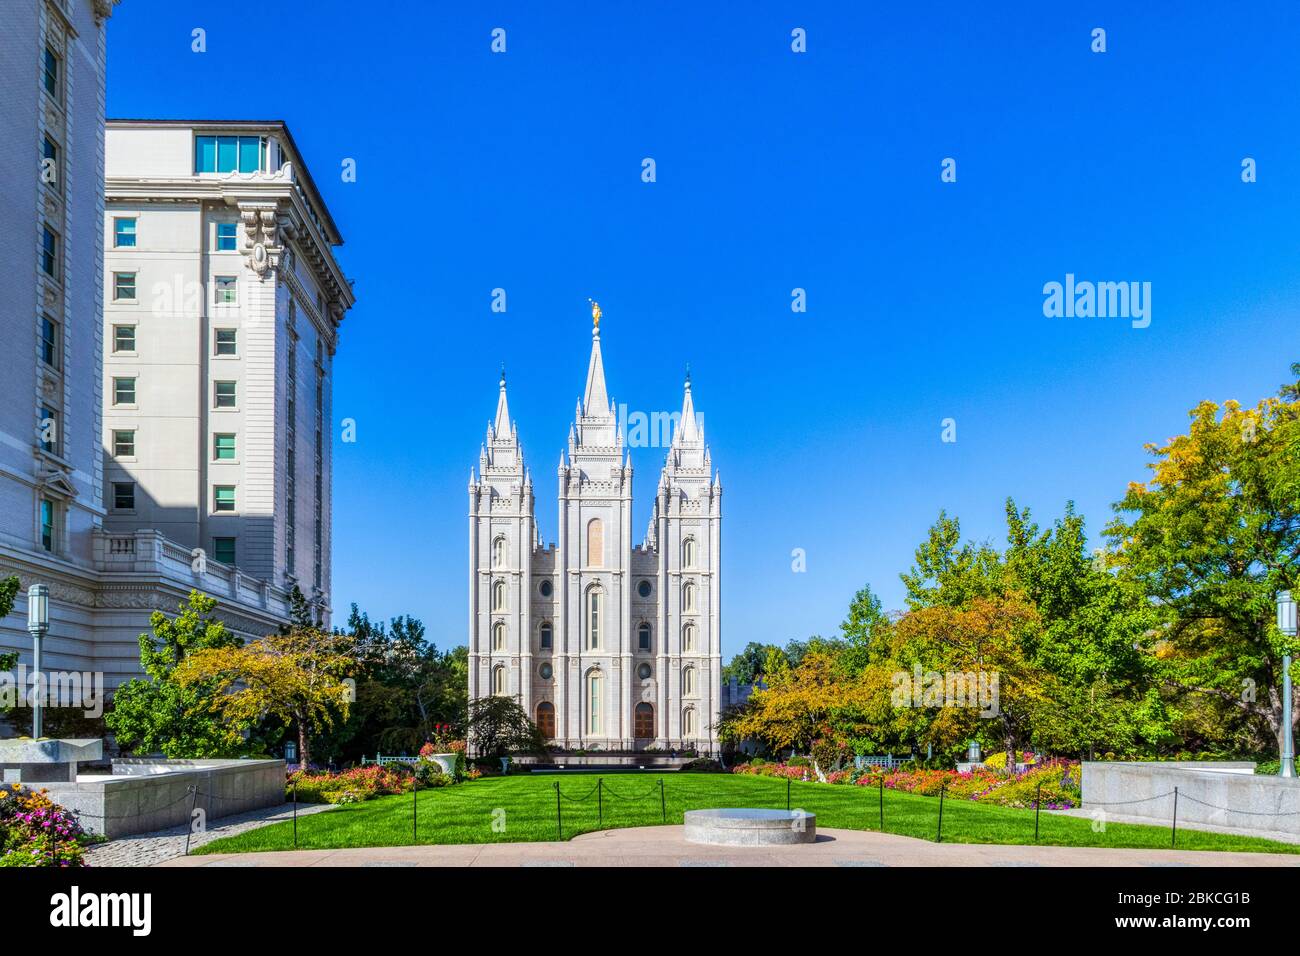 Salt Lake City LDS Temple in Temple Square. This temple took 40 years to build in the 1800s by the Church of Jesus Christ of the Latter-Day Saints. Stock Photo